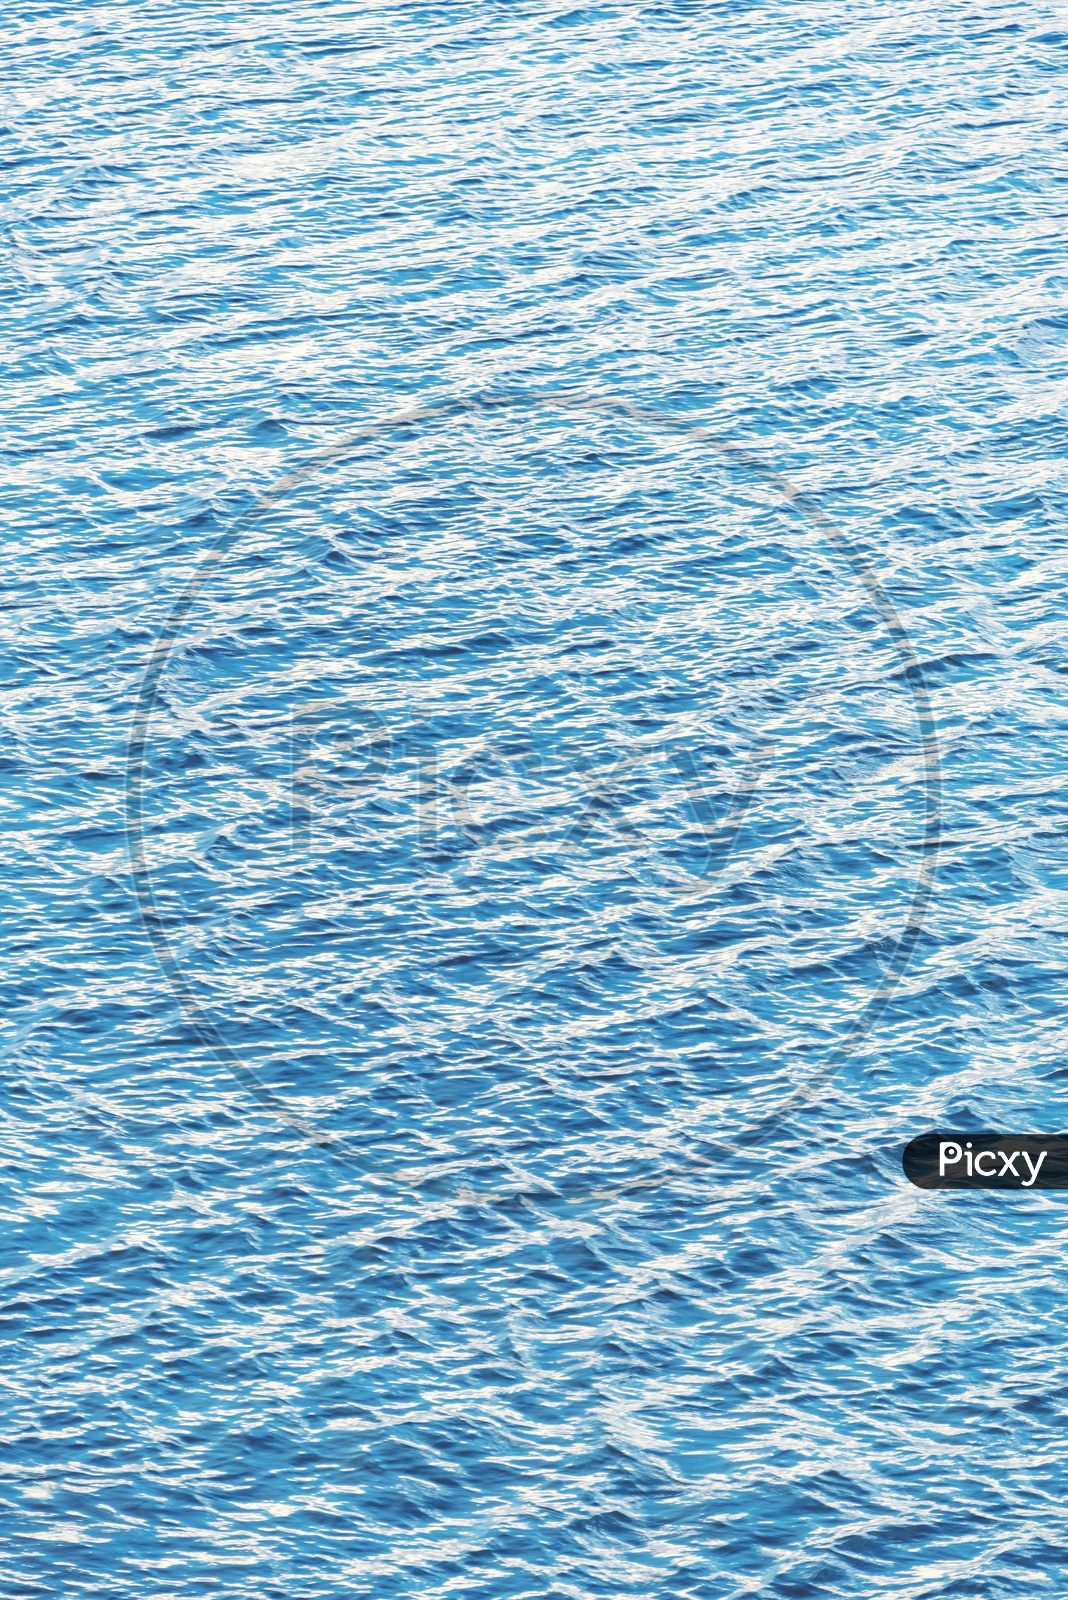 Abstract Texture of Water Surface Background